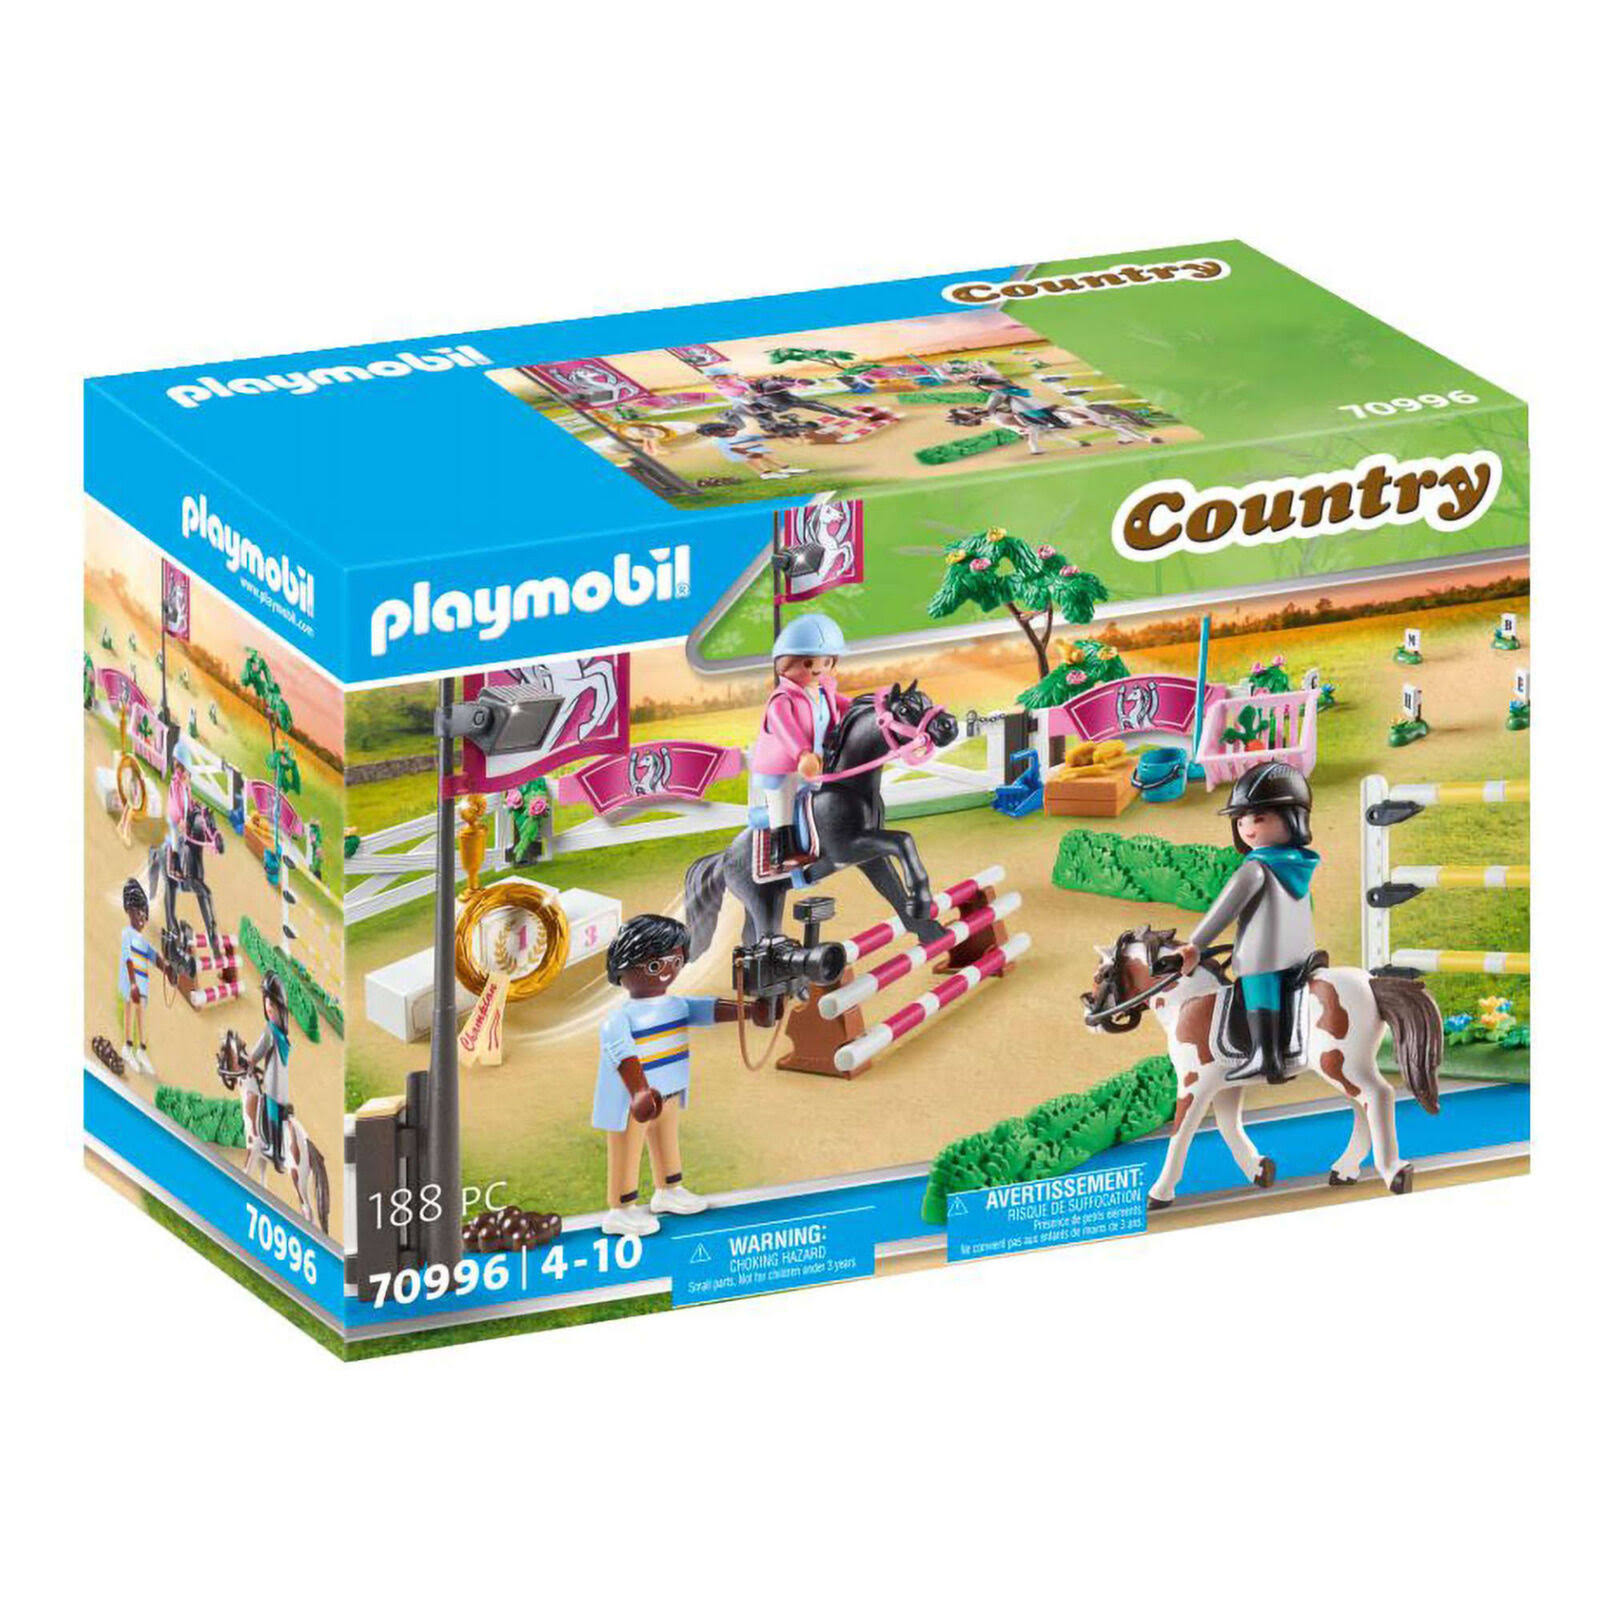 Playmobil 70996 Country Horse Riding Tournament